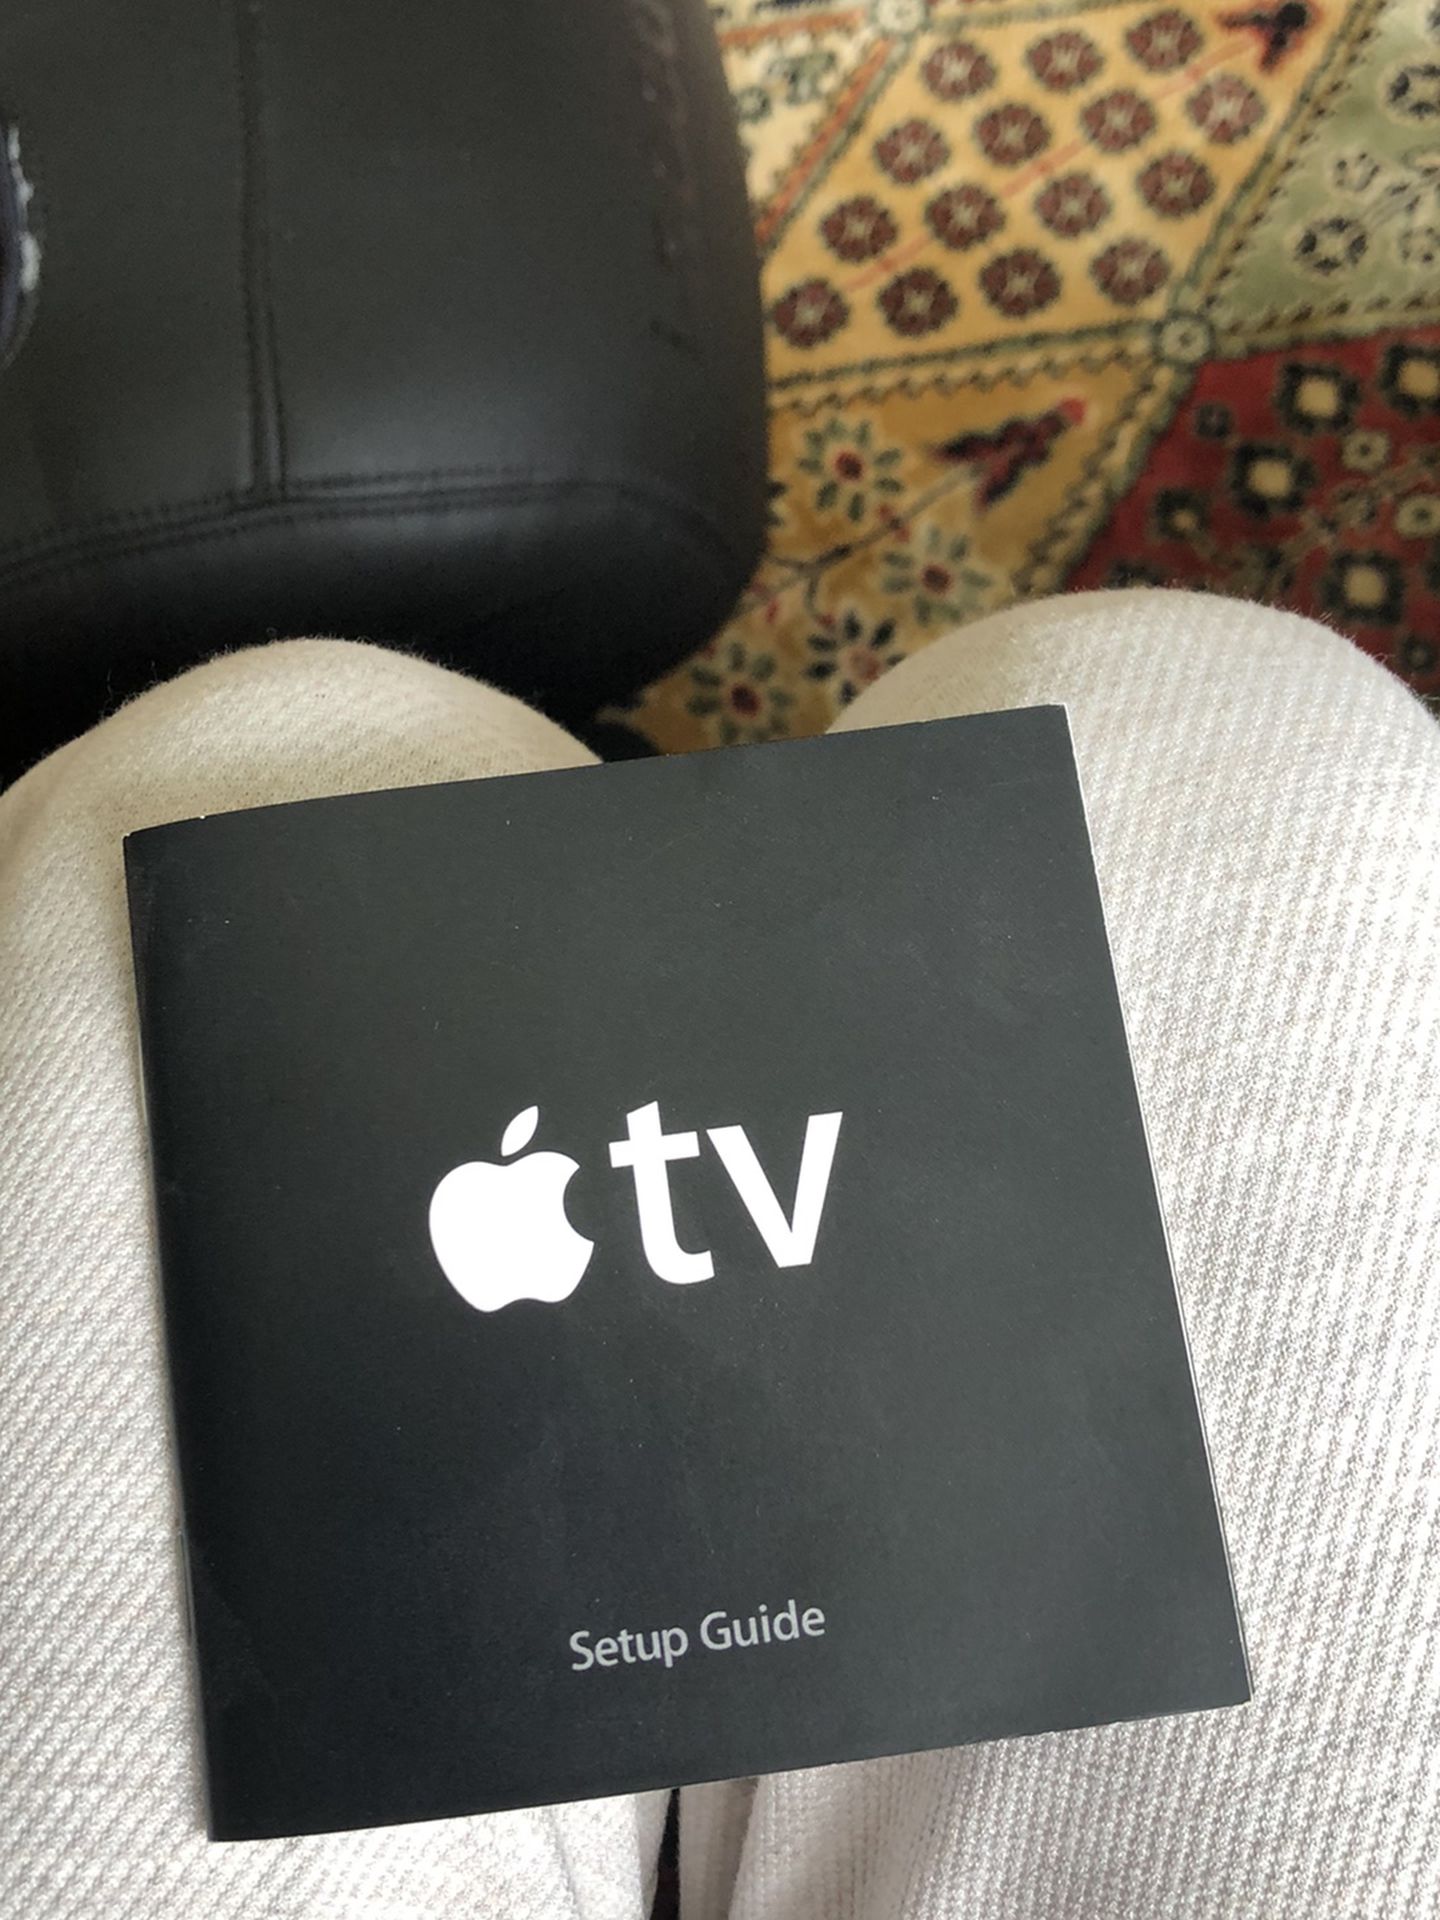 Apple TV With Remote